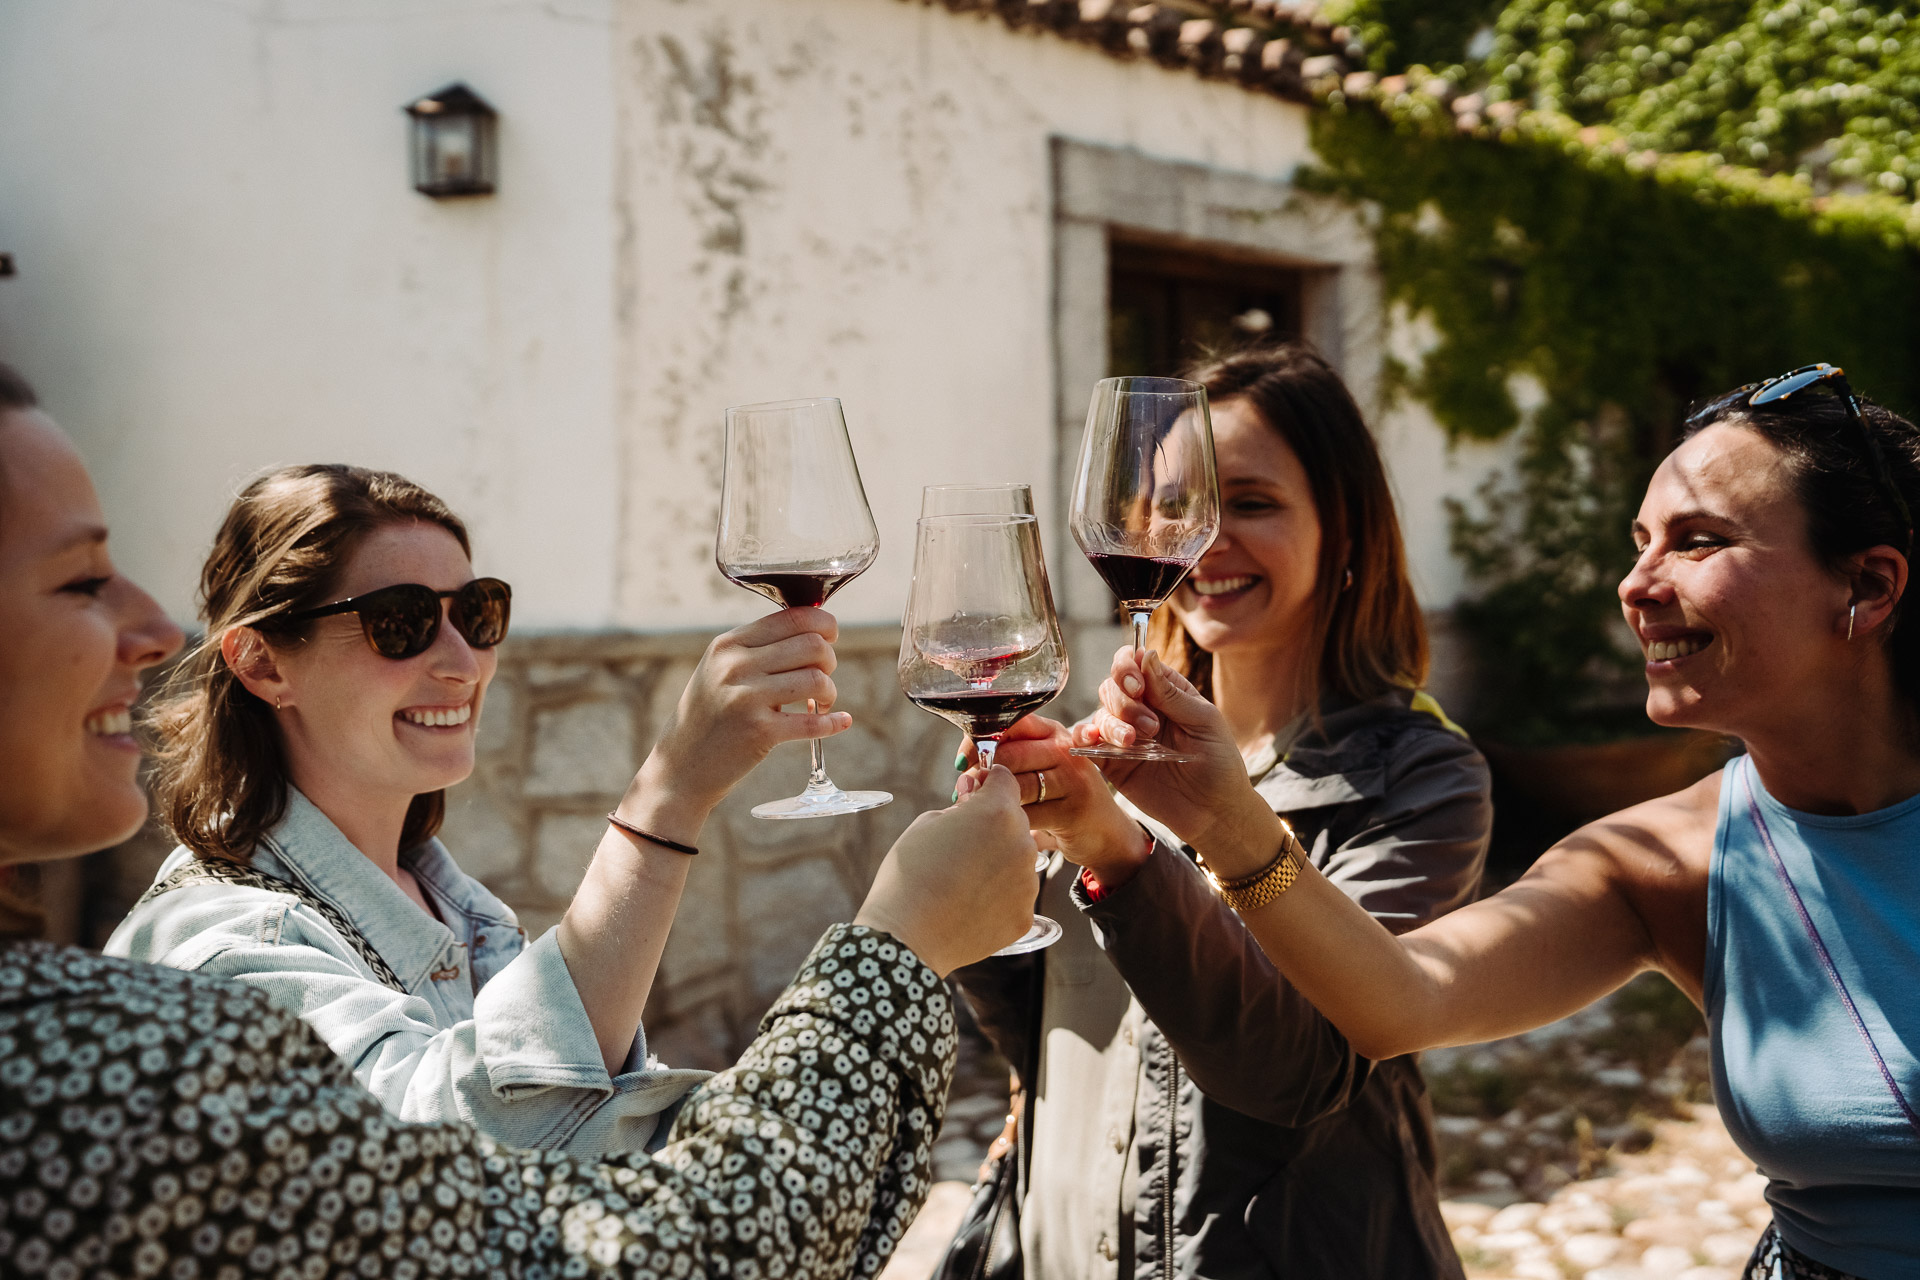 Guests raise their wine glasses for a toast on our Toledo winery tour